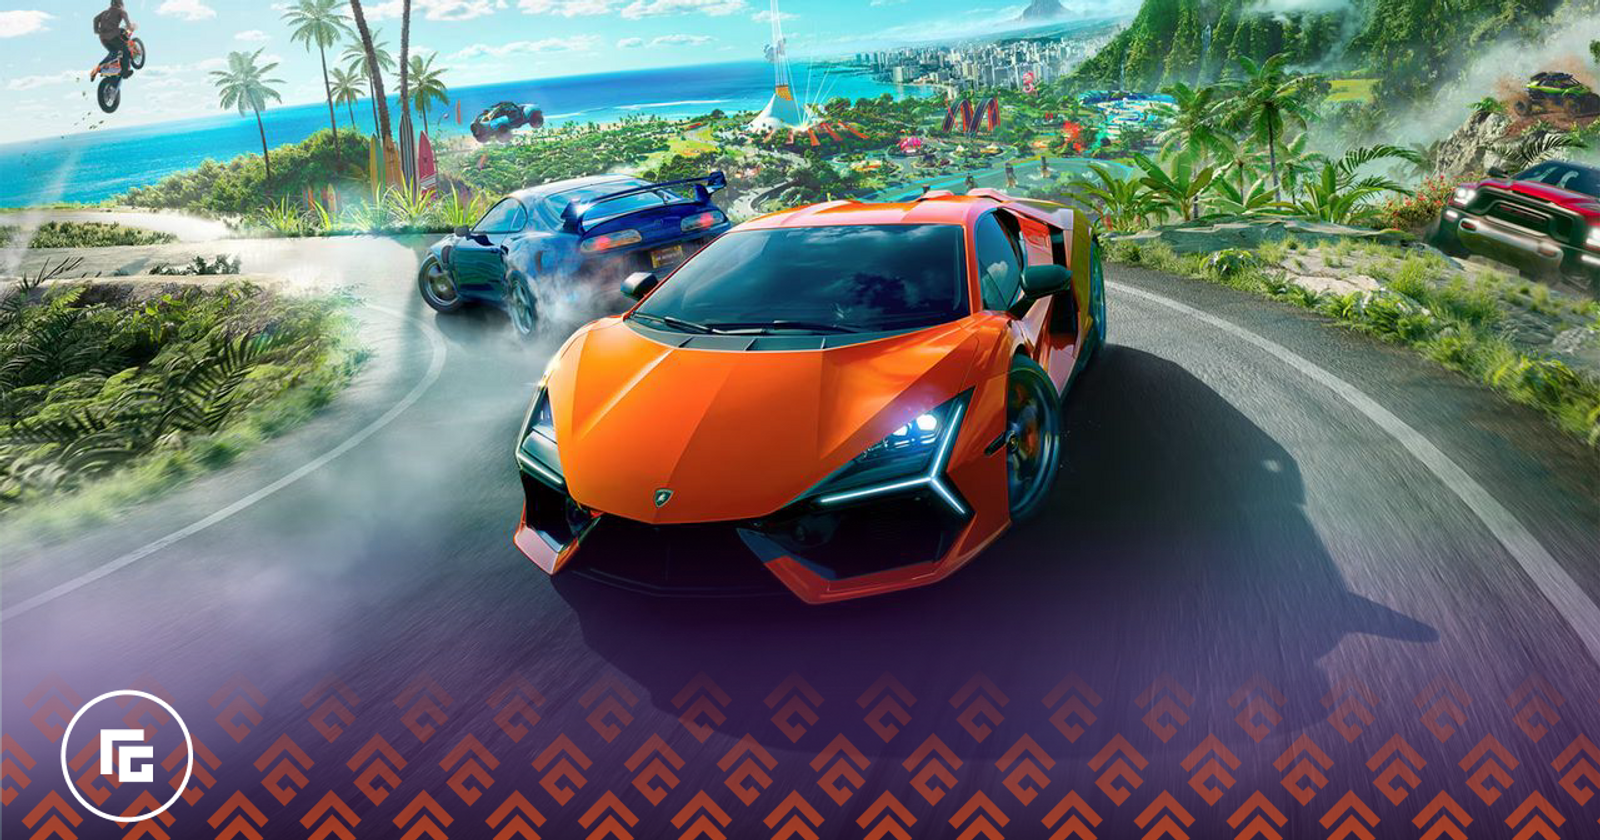 The Crew™ Motorfest | Year 1 Pass - Epic Games Store